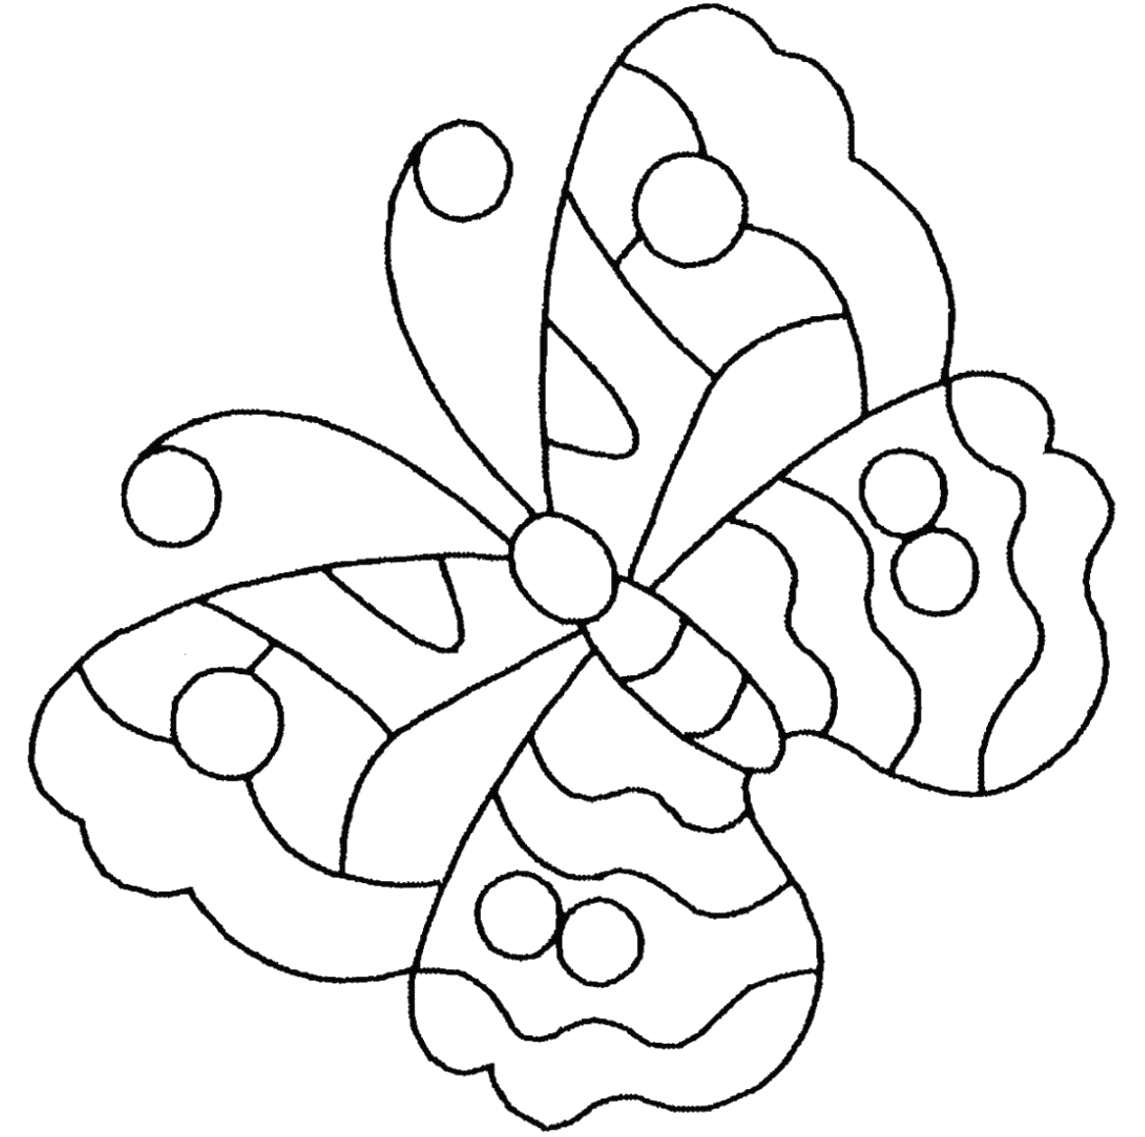 Cute Butterfly Coloring Pages For Adults - Coloring Home